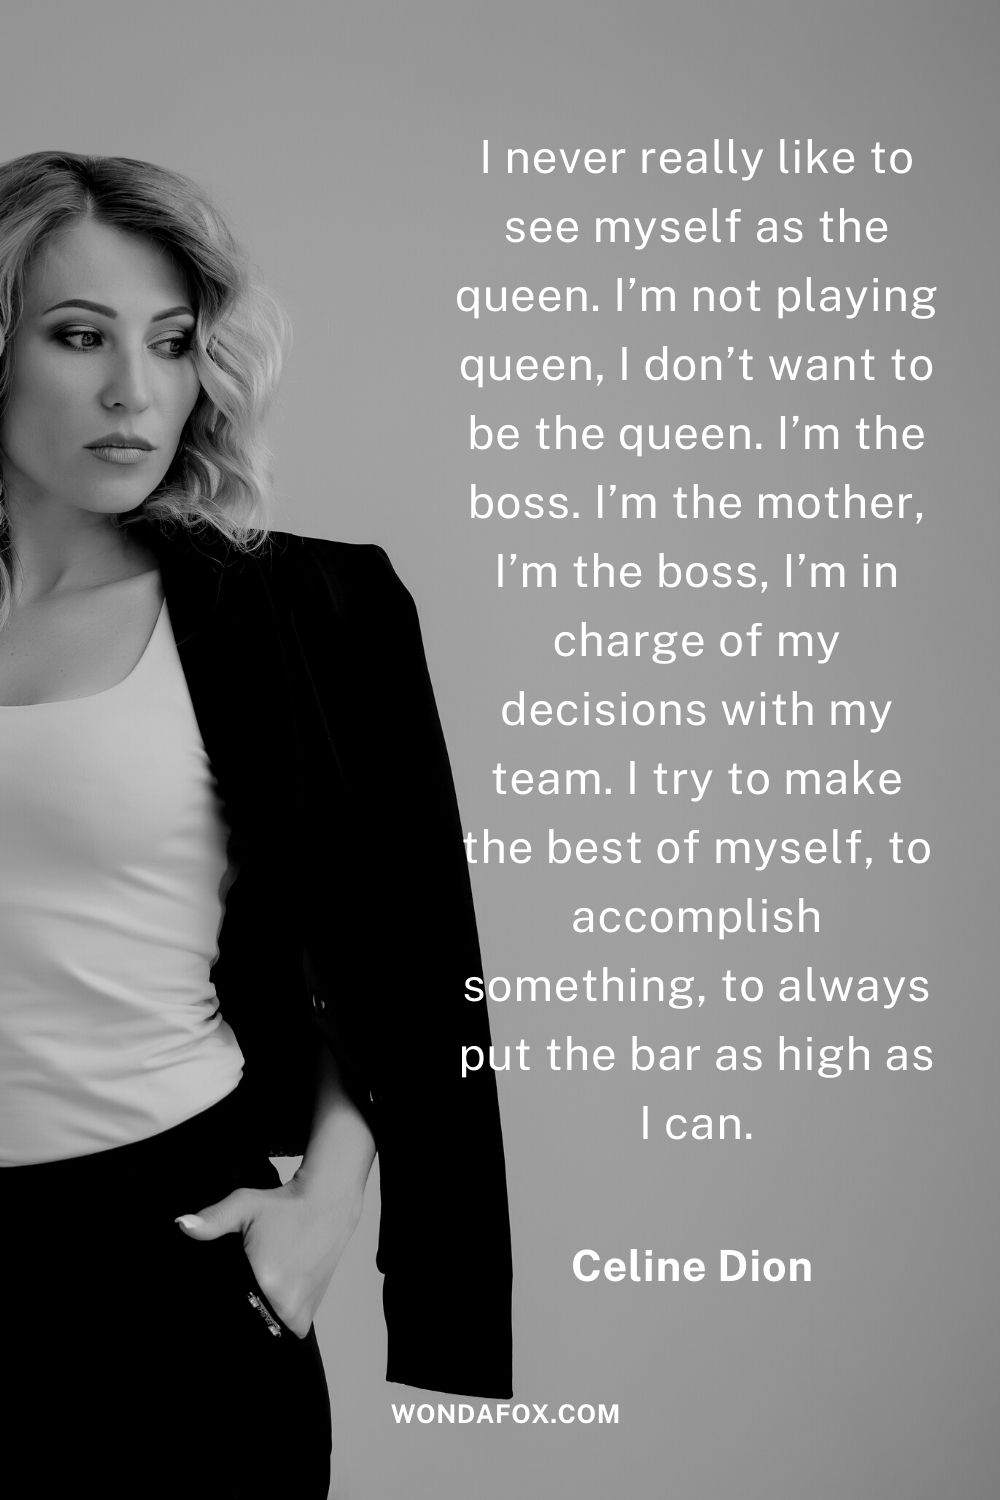 I never really like to see myself as the queen. I’m not playing queen, I don’t want to be the queen. I’m the boss. I’m the mother, I’m the boss, I’m in charge of my decisions with my team. I try to make the best of myself, to accomplish something, to always put the bar as high as I can.